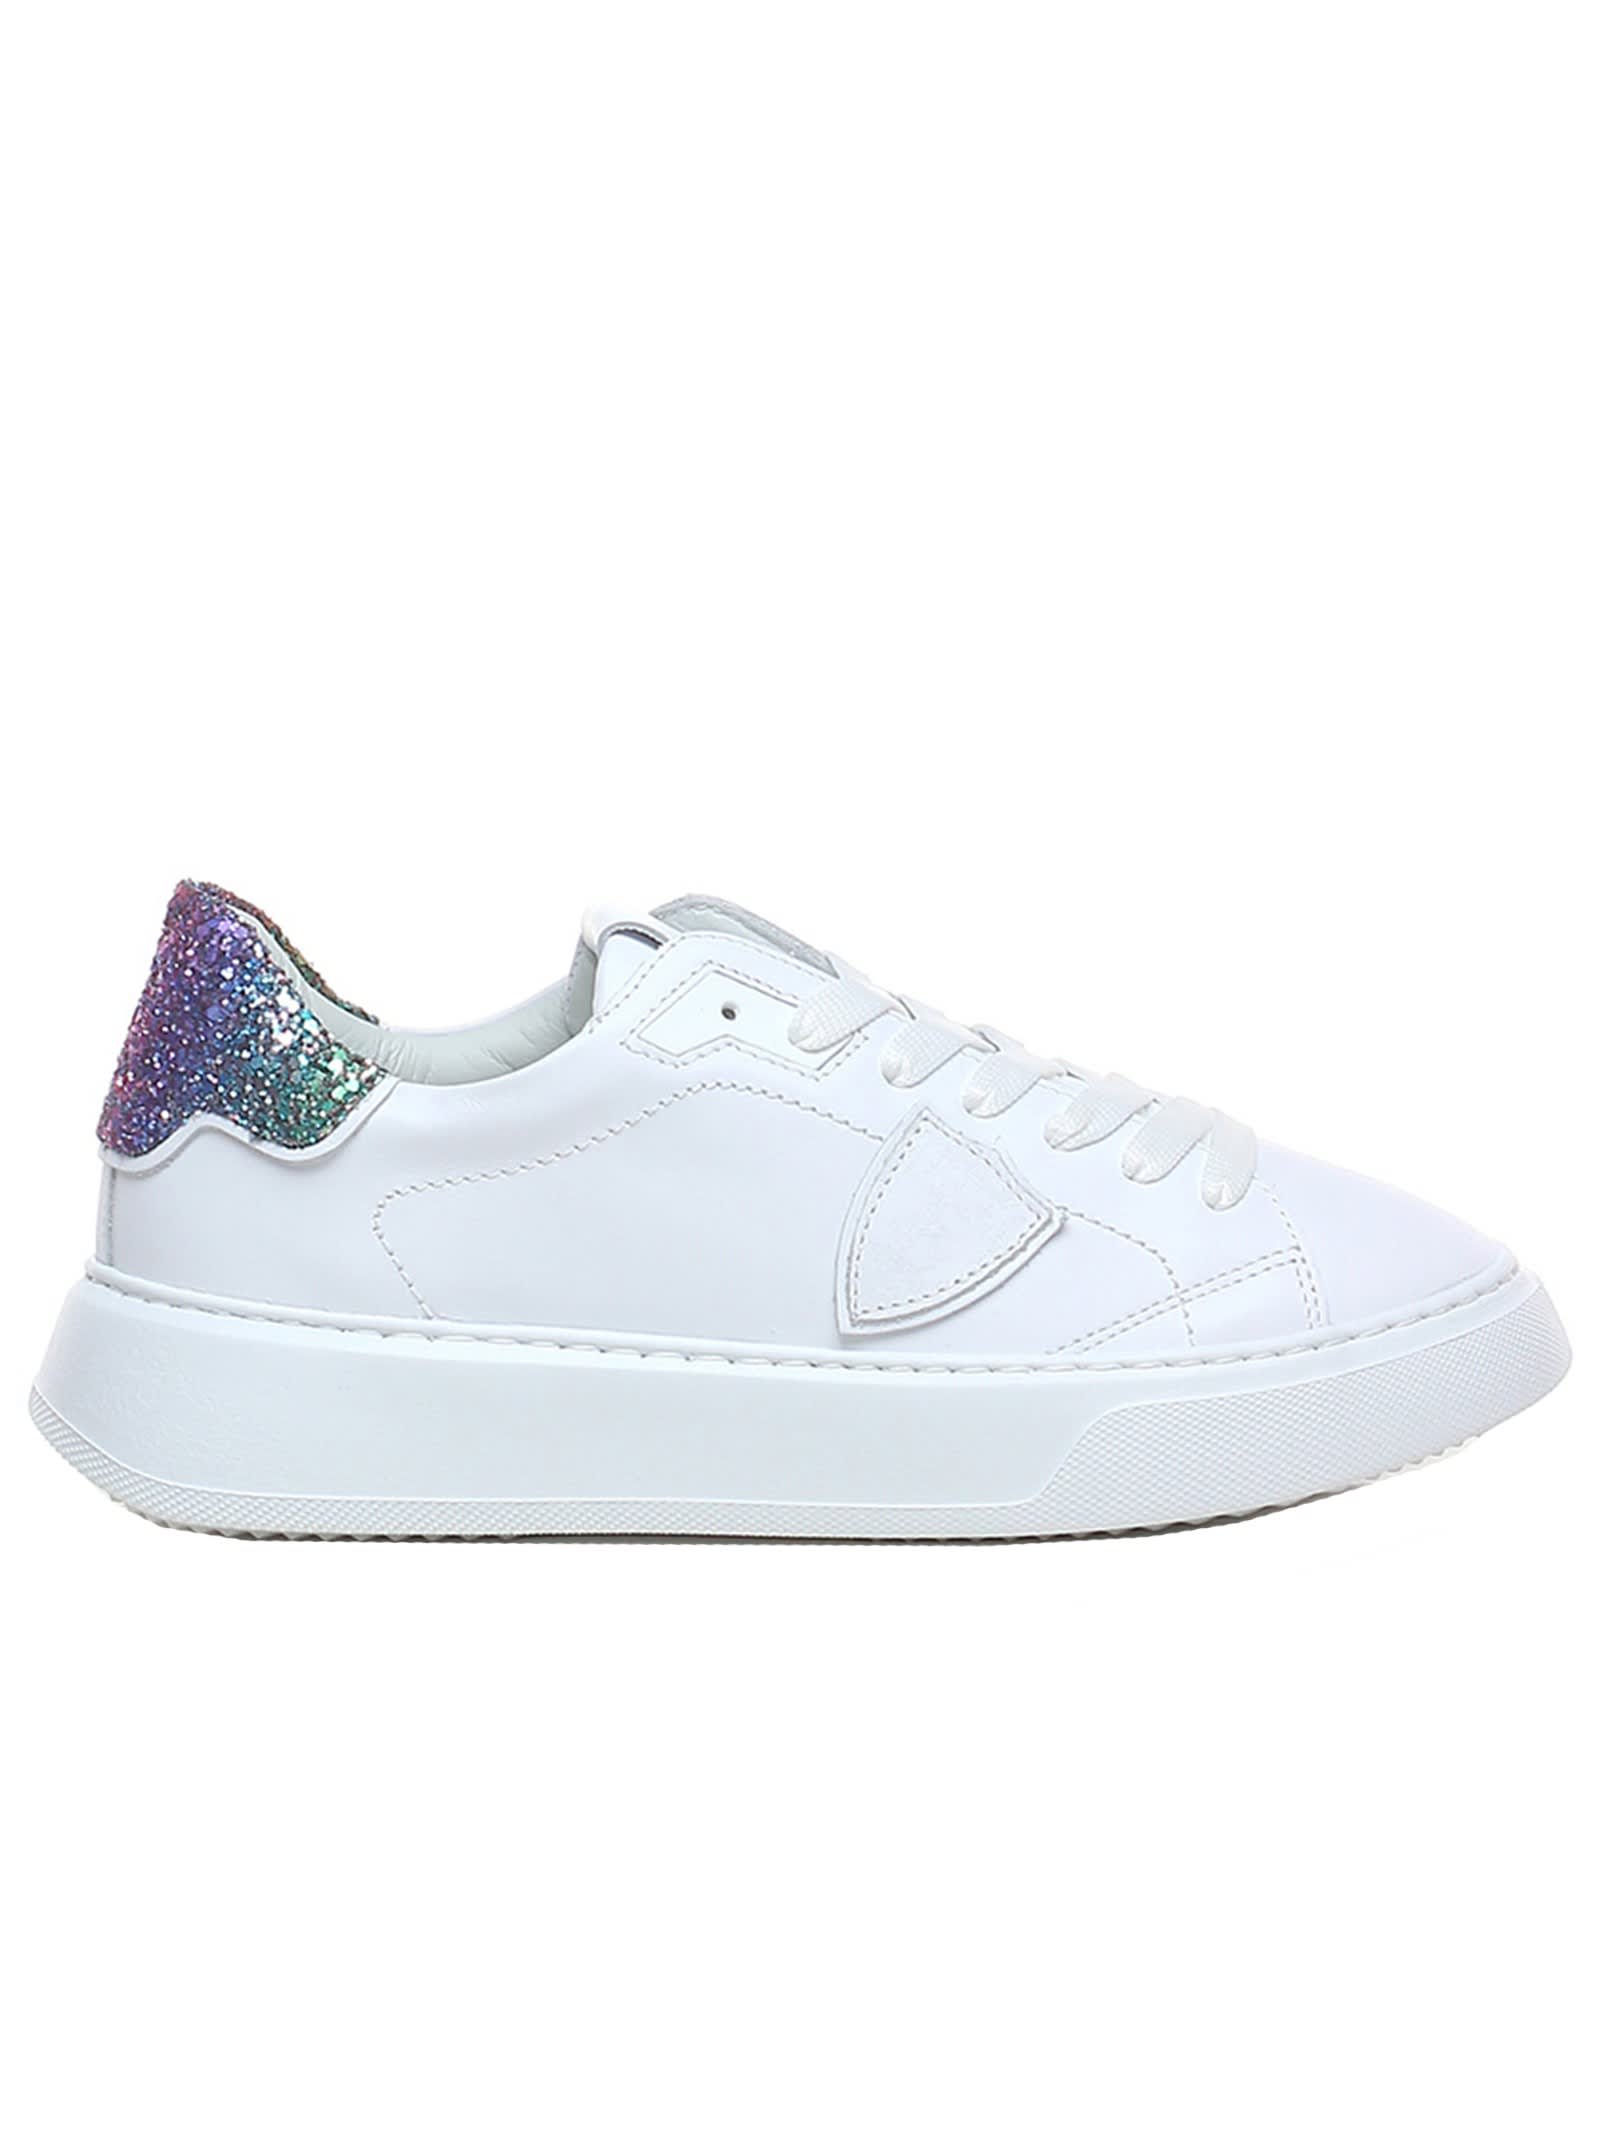 Philippe Model White/multi Leather Sneakers